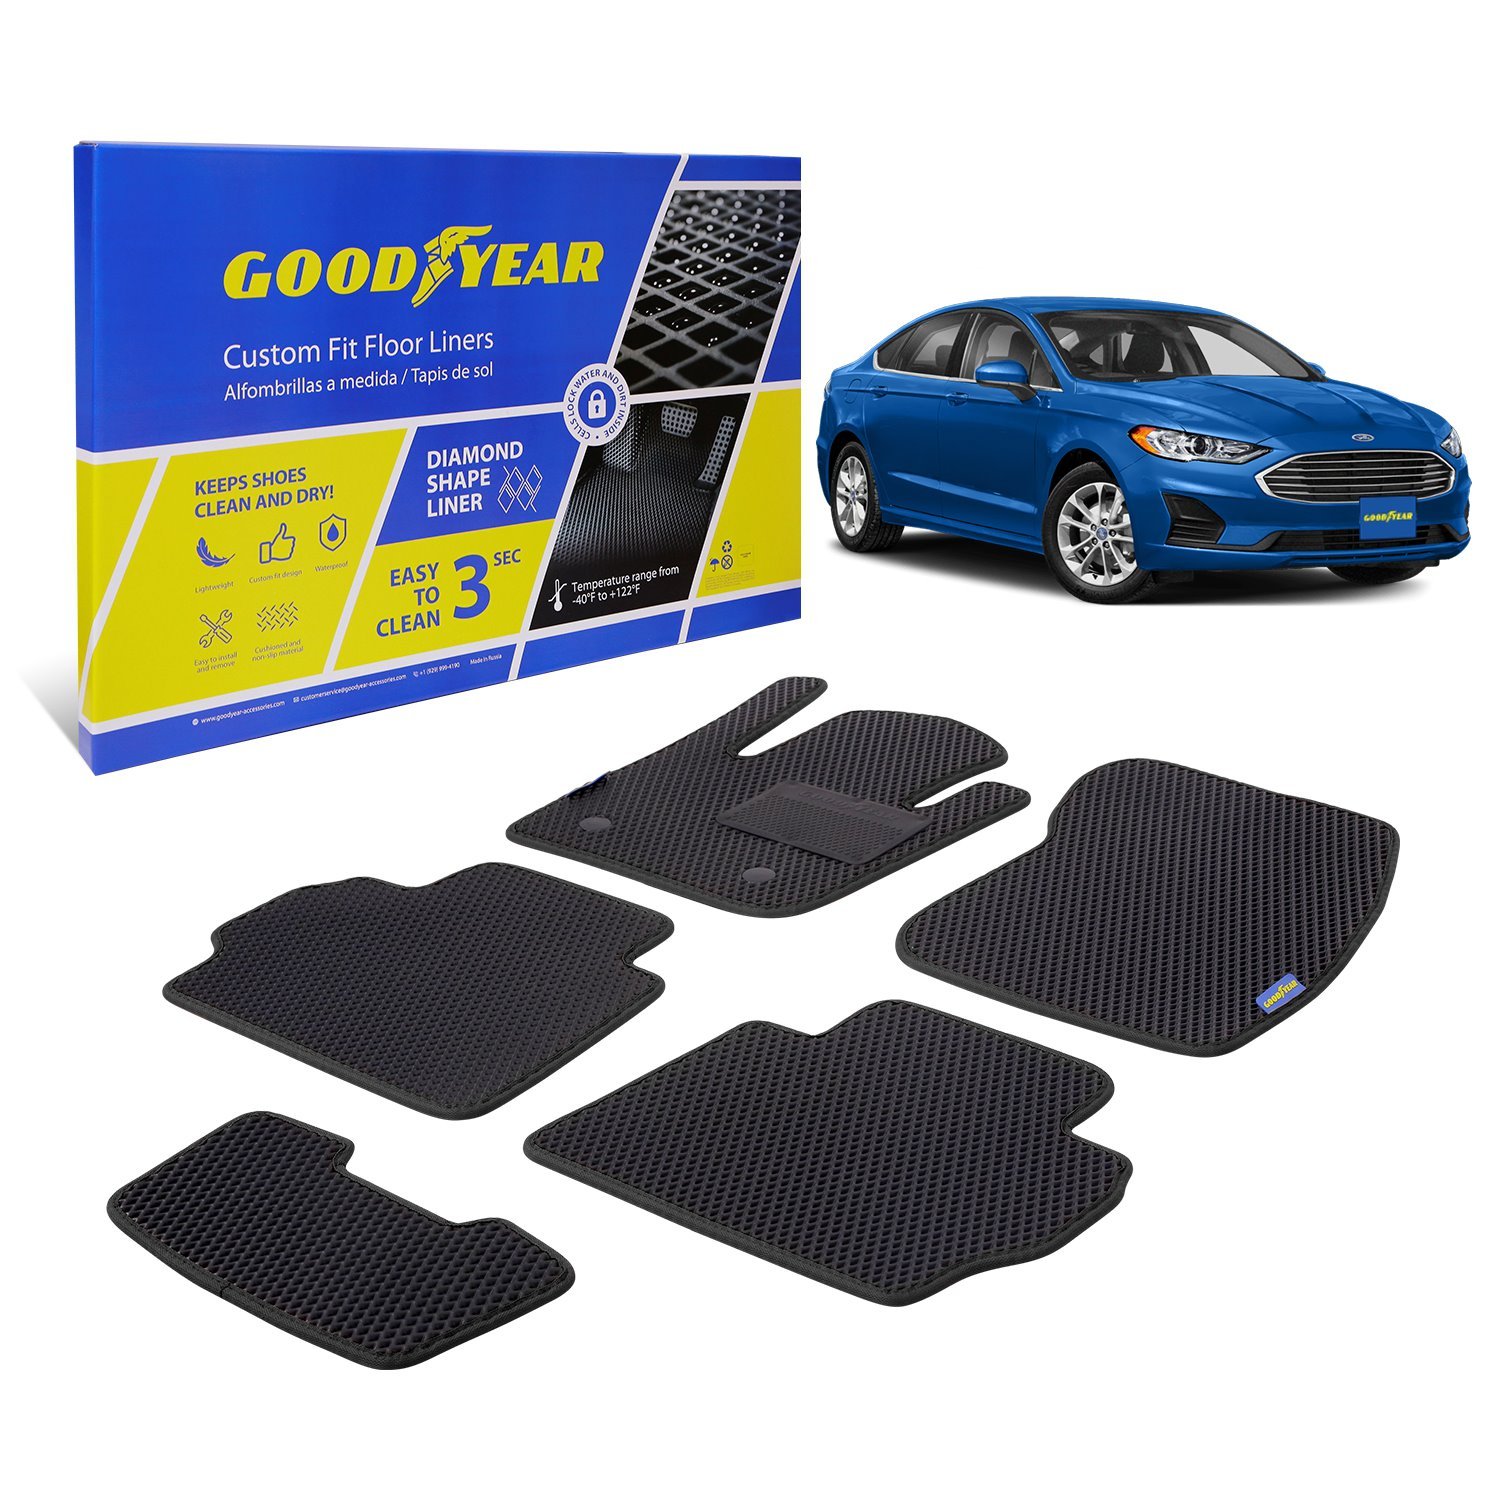 Goodyear Custom-Fit Floor Liners for 2013-2016 Ford Fusion